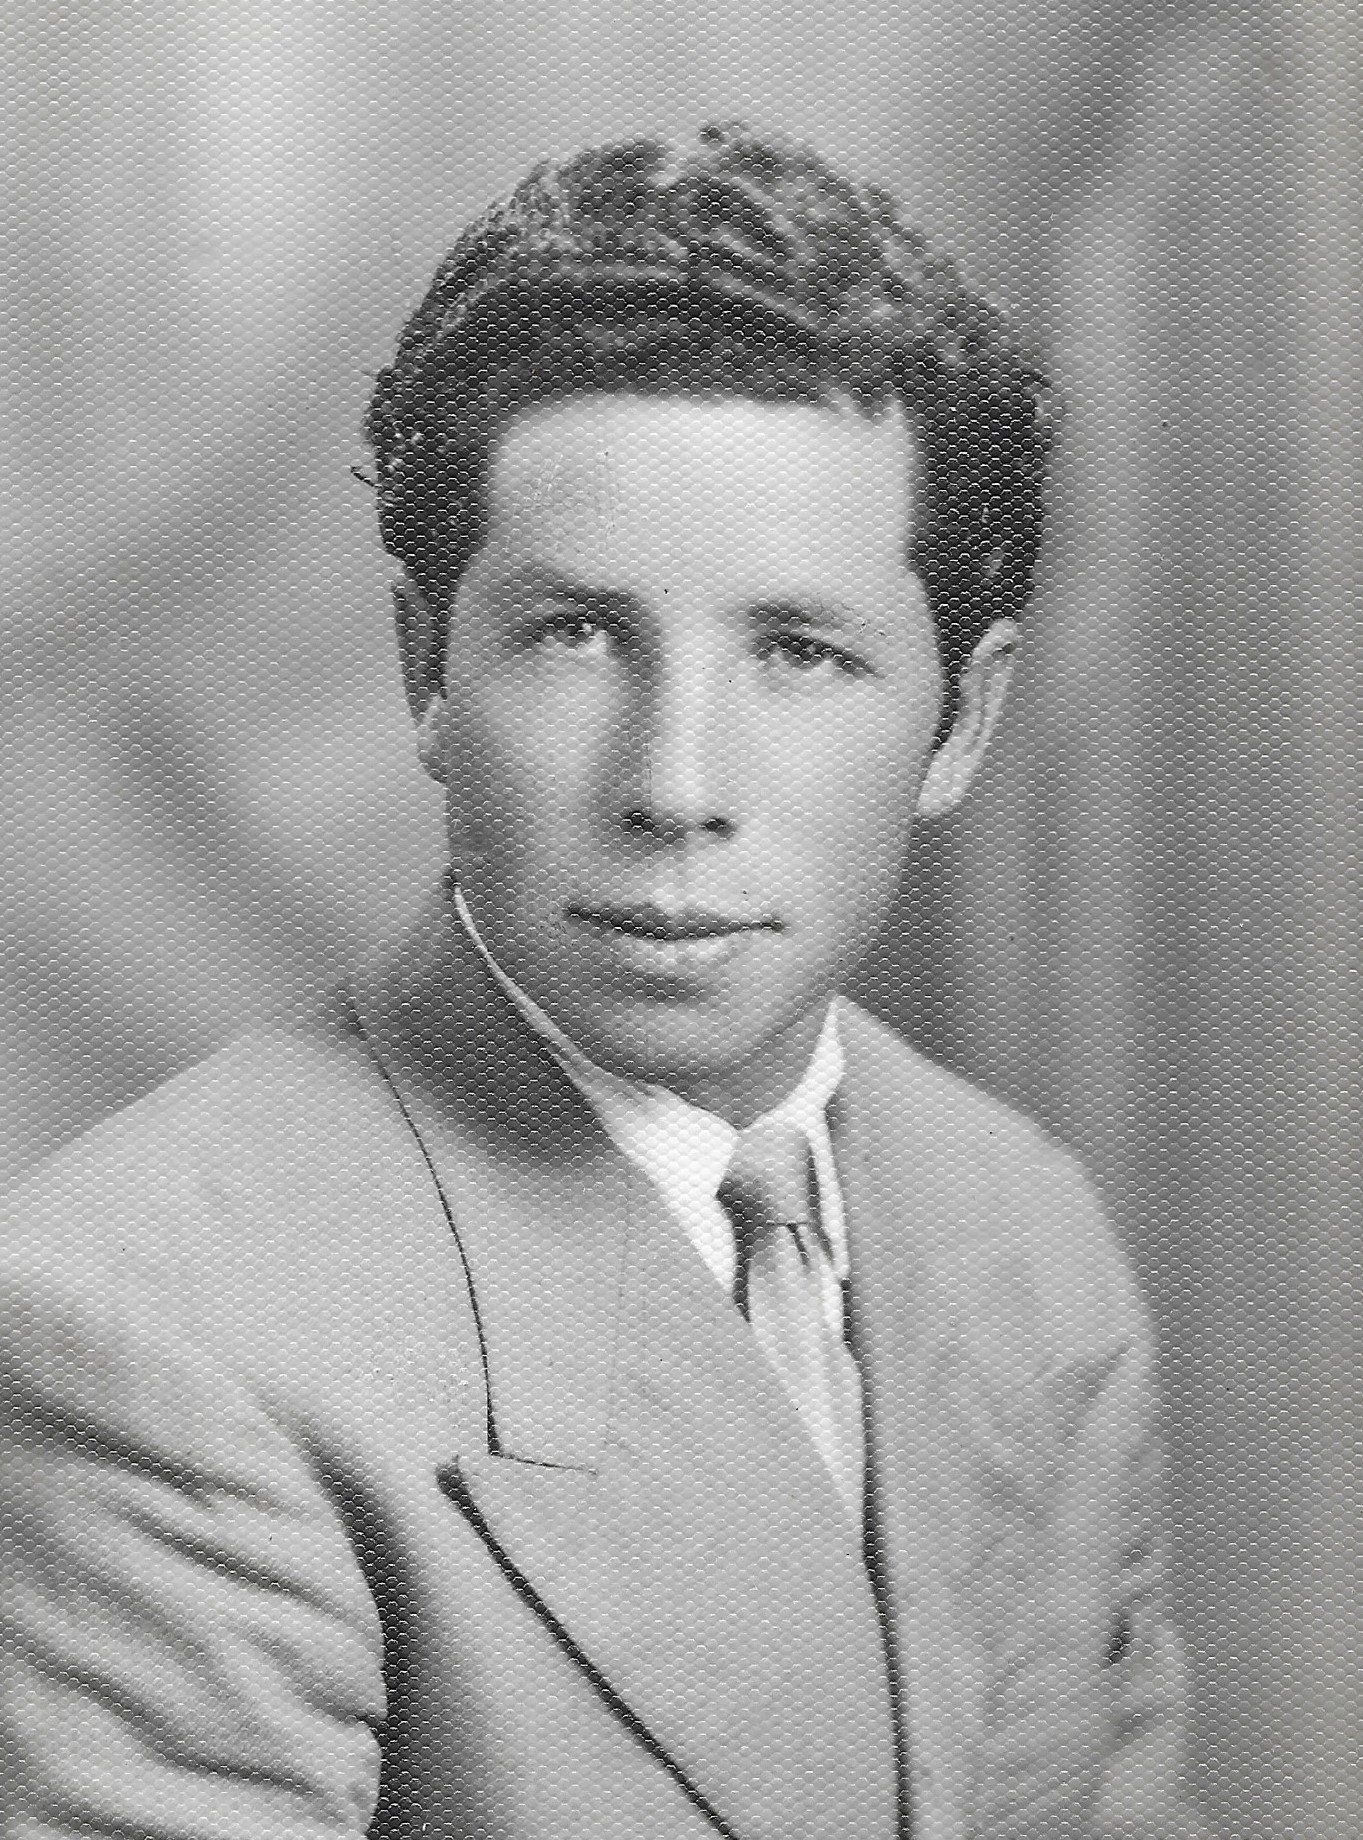 A black and white portrait of an Italian man.